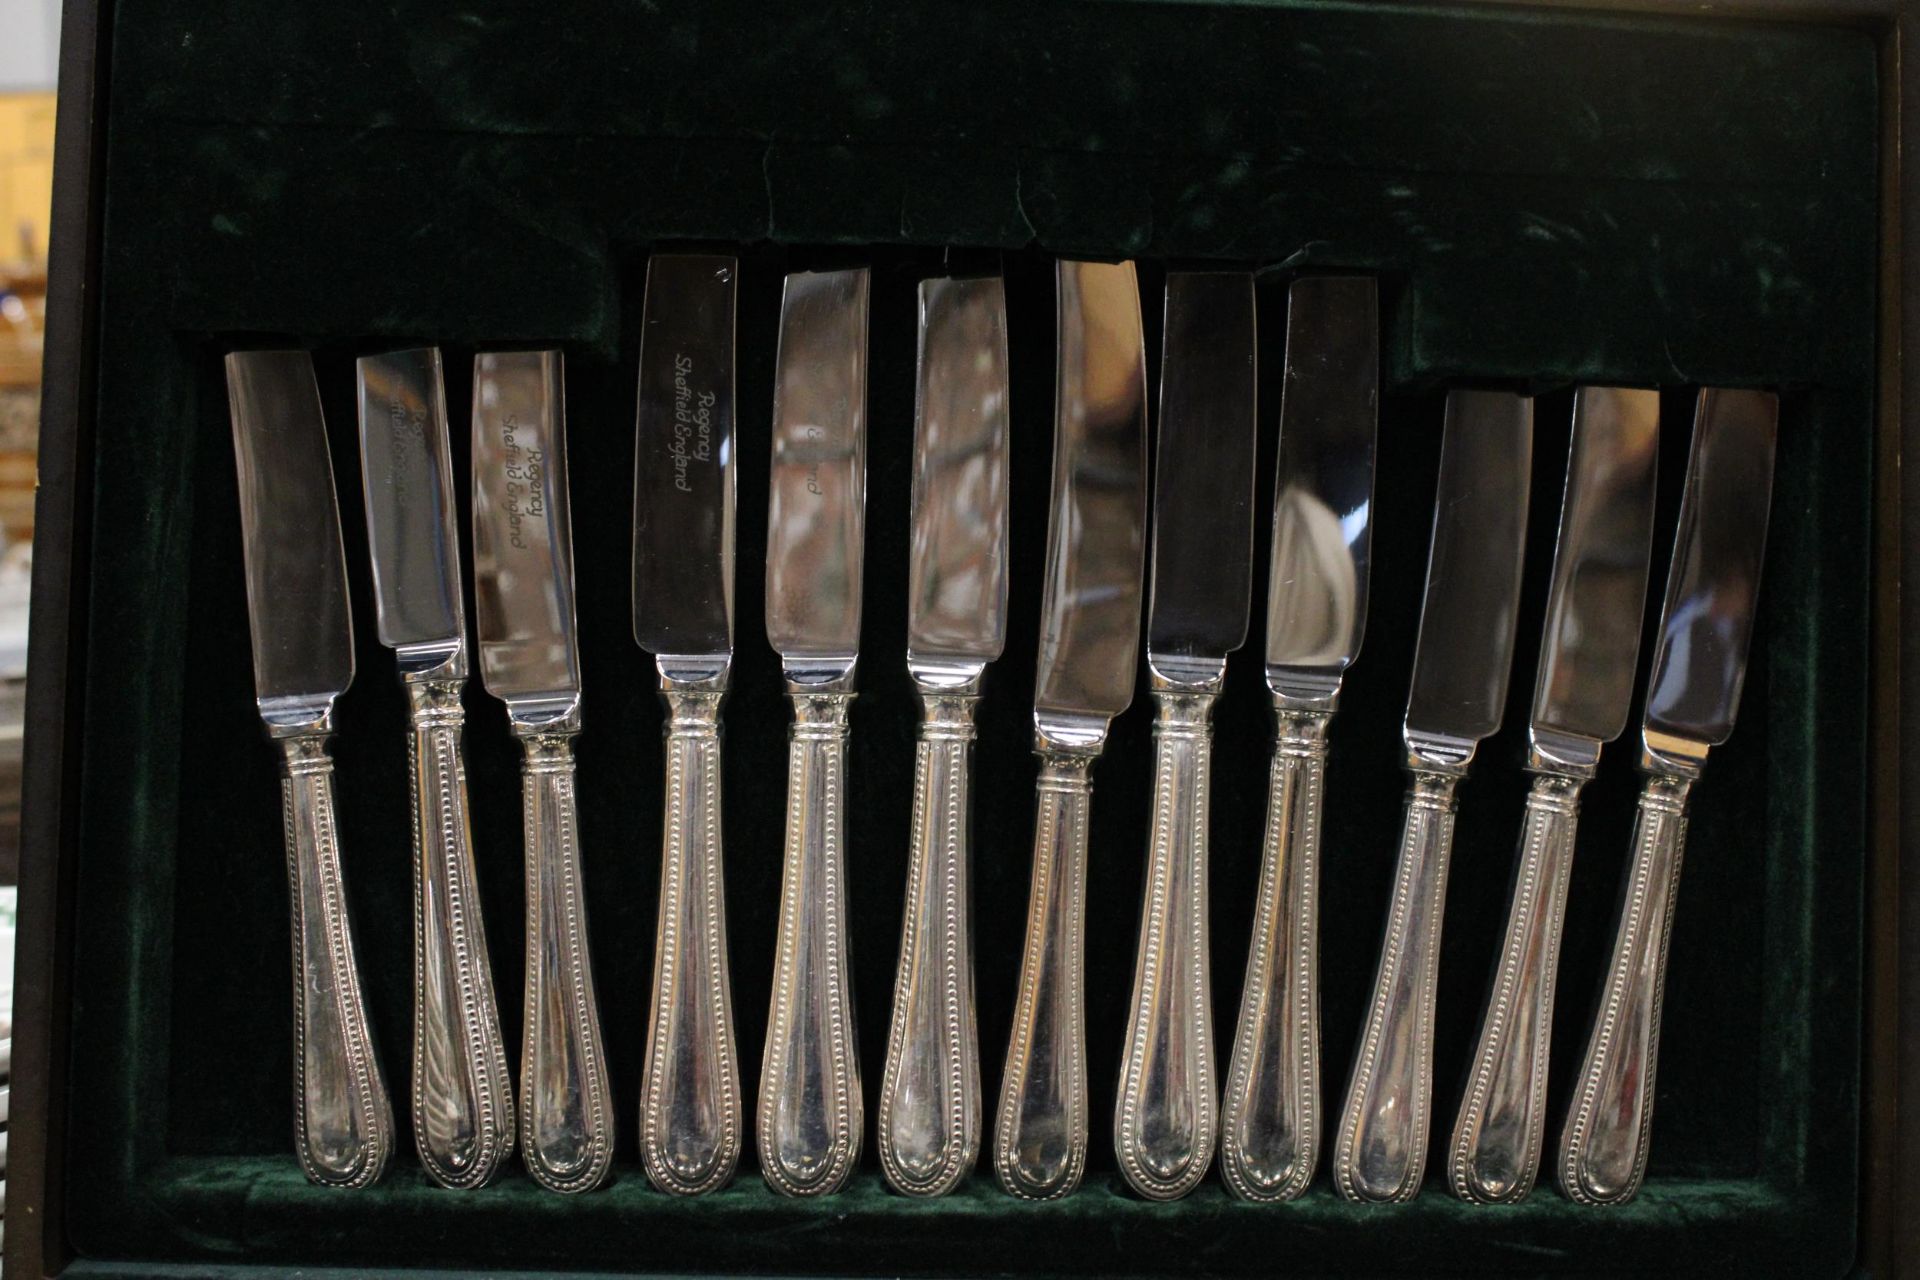 TWO CASED CANTEENS OF CUTLERY, ONE IS COMPLETE, THE OTHER HAS THREE TEASPOONS MISSING - Image 6 of 8